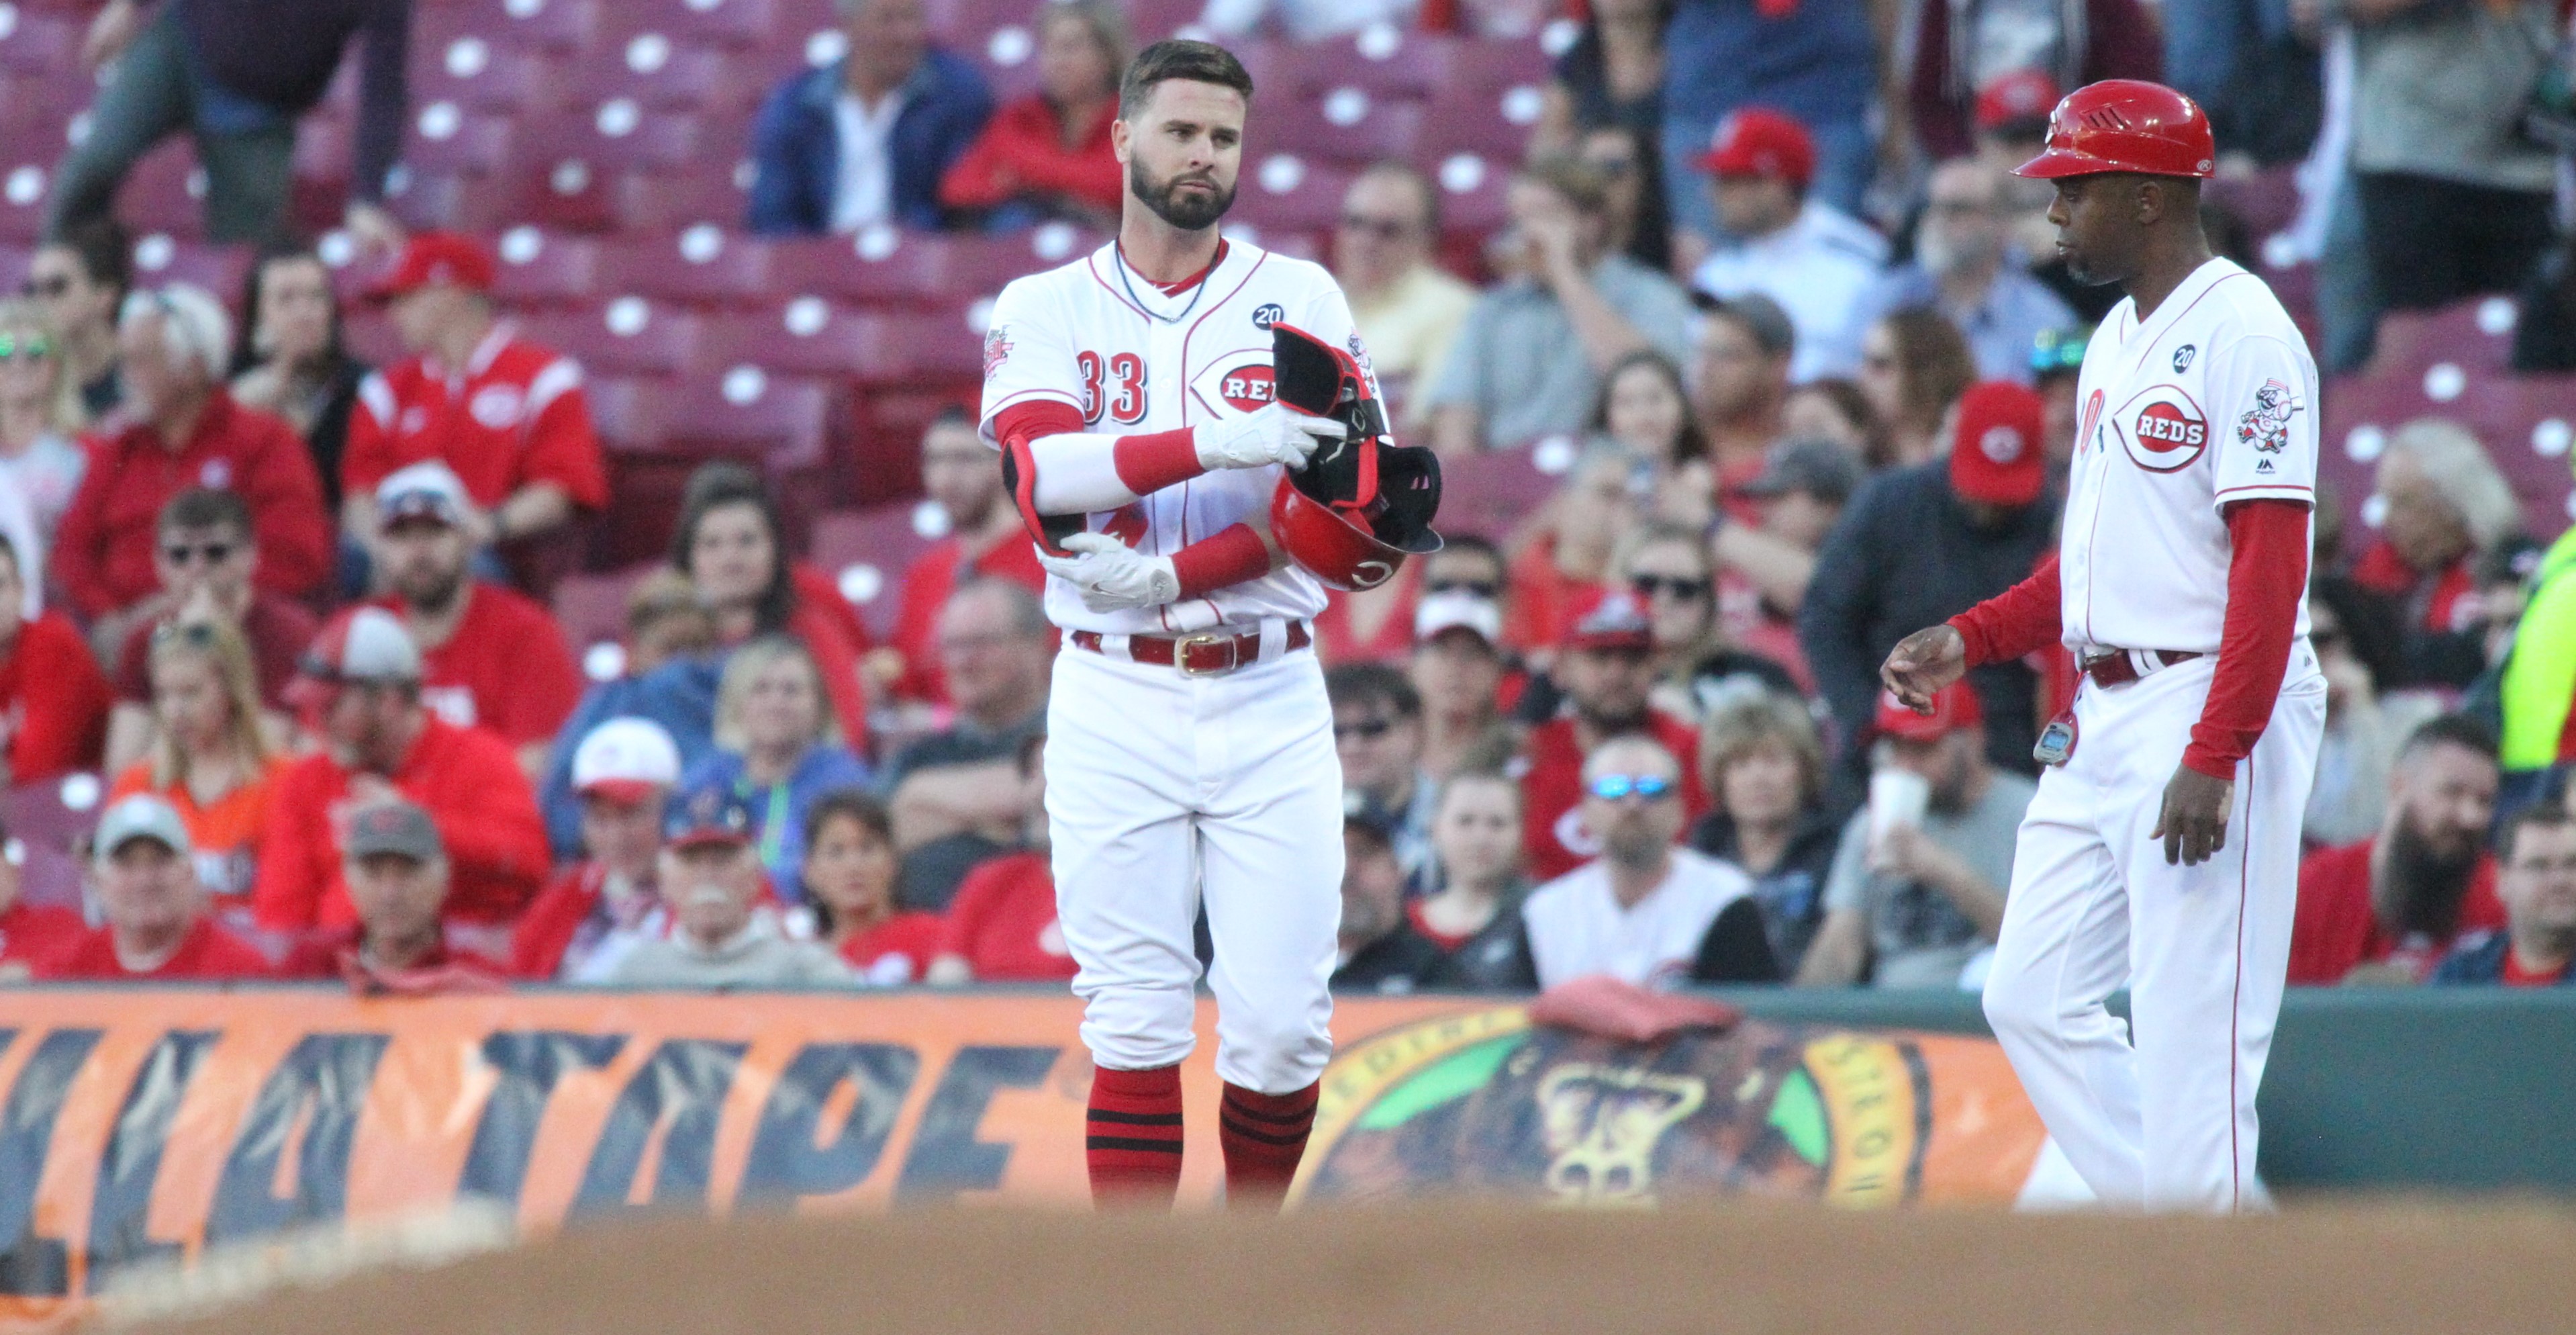 How the Cincinnati Reds Jesse Winker became one of the best hitters